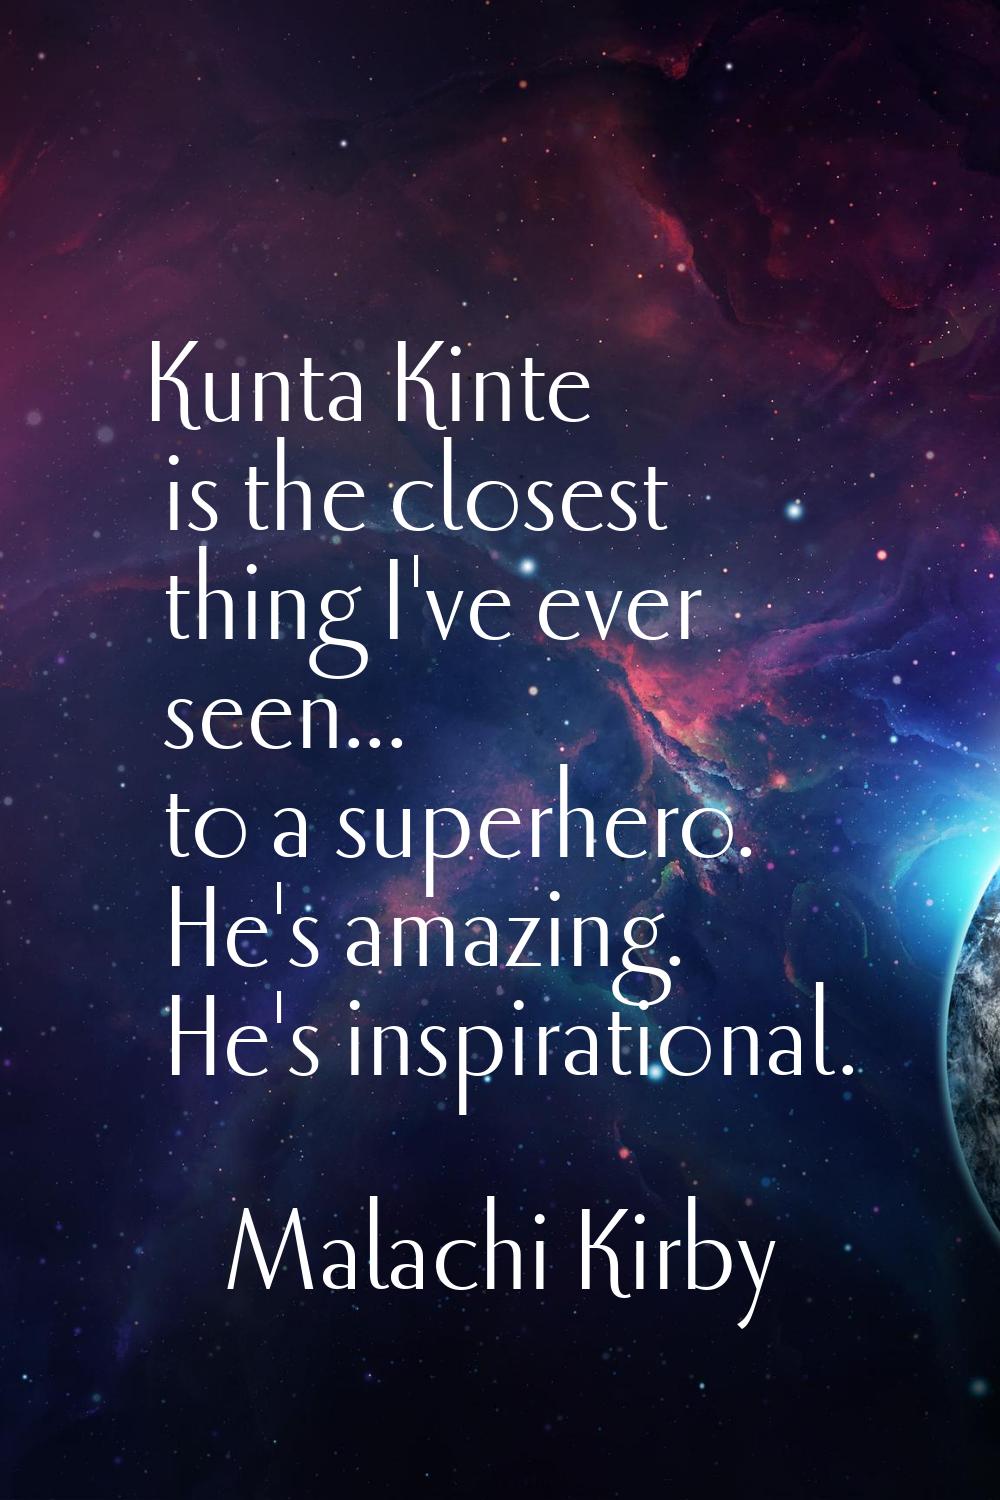 Kunta Kinte is the closest thing I've ever seen... to a superhero. He's amazing. He's inspirational